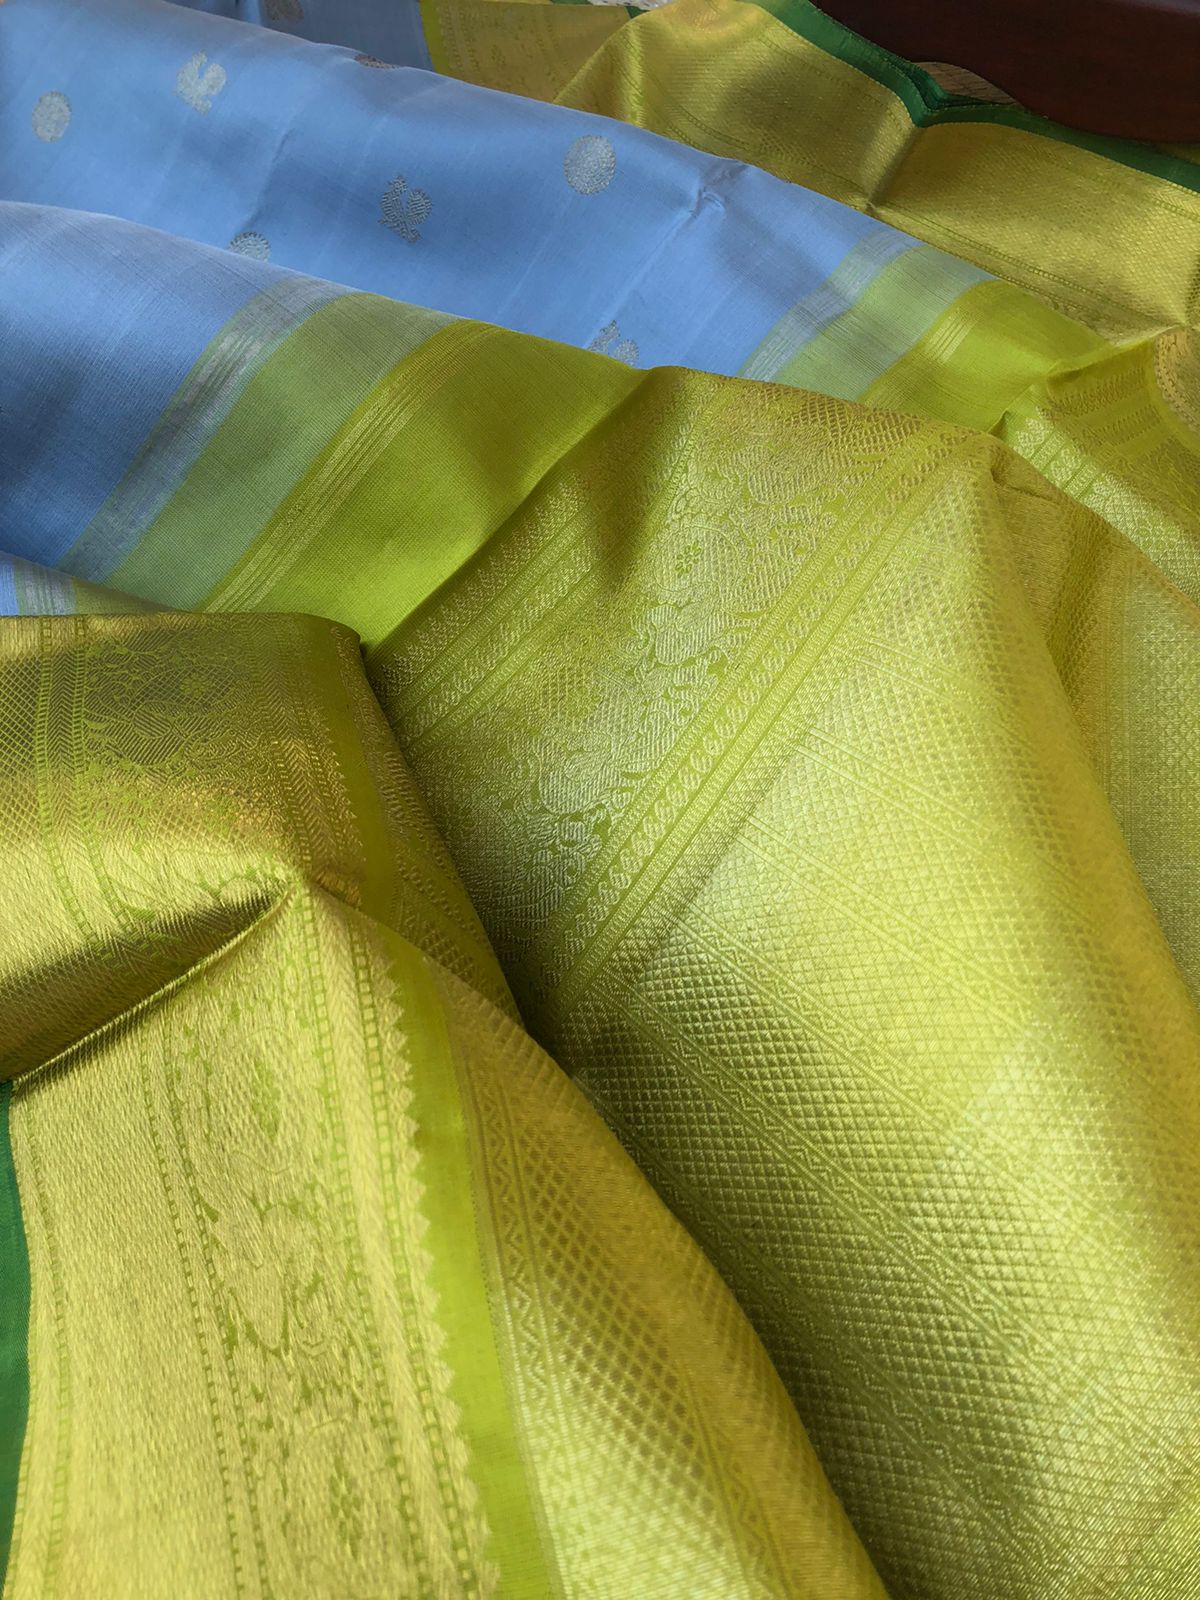 Meenakshi Kalayanam - Authentic Korvai Kanchivarams - such a stunning unusual bluish grey and olive green